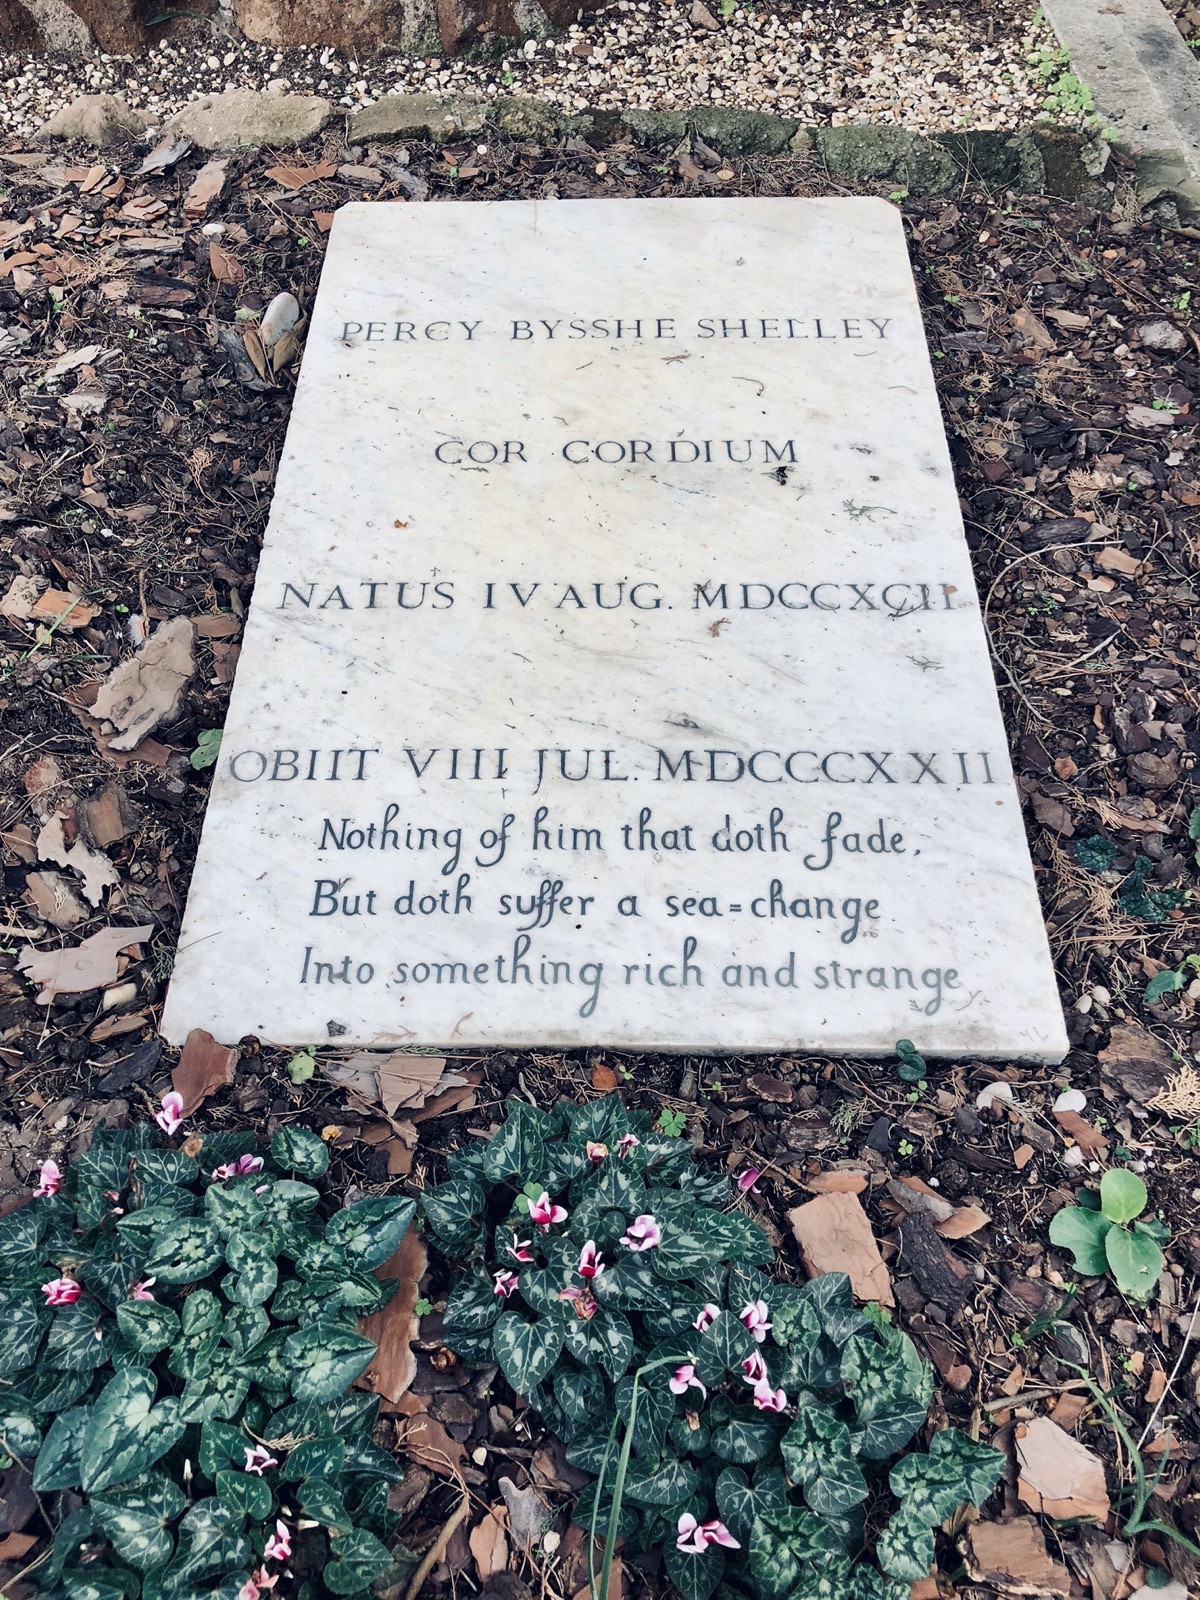 Shelley's grave in Rome